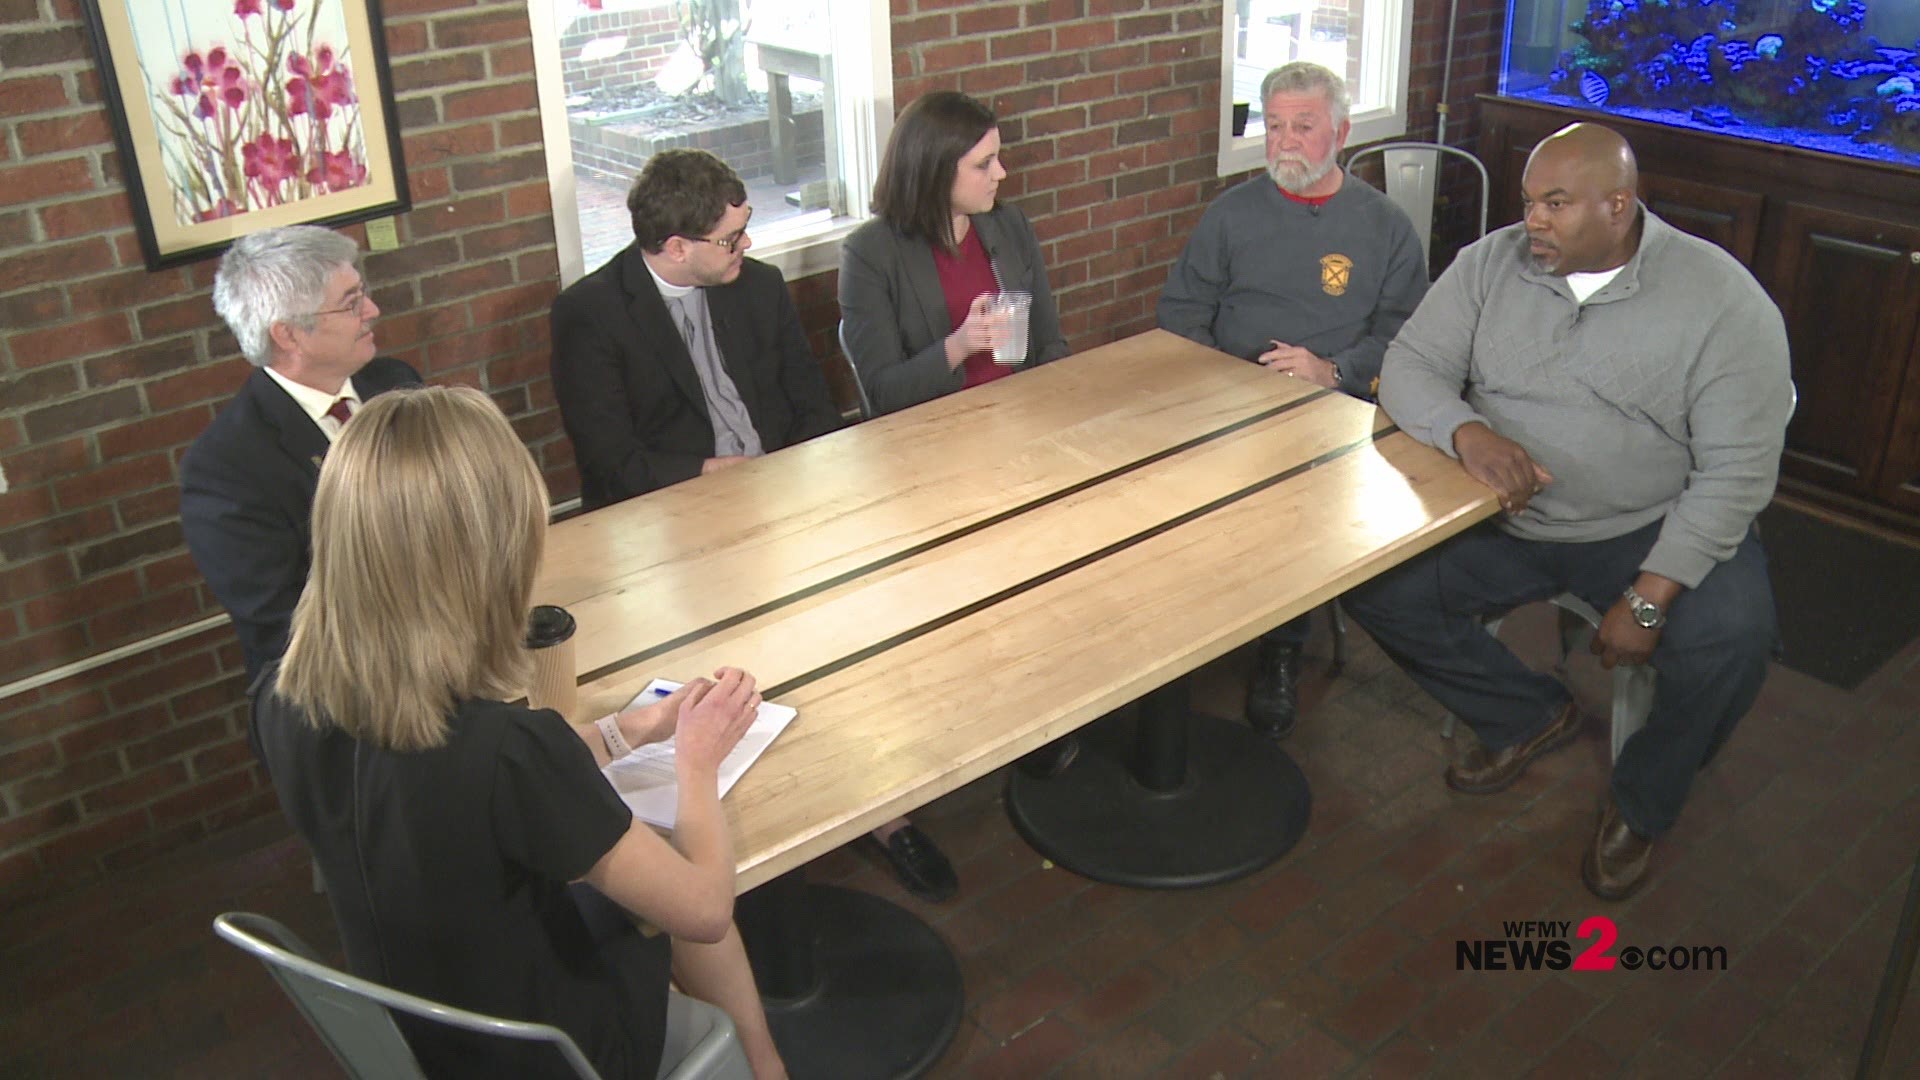 Five people with five different opinions on one hot-button issue: Confederate Monuments. WFMY News 2's Maddie Gardner sat down with them to talk about what these monuments represent and if there's a compromise.